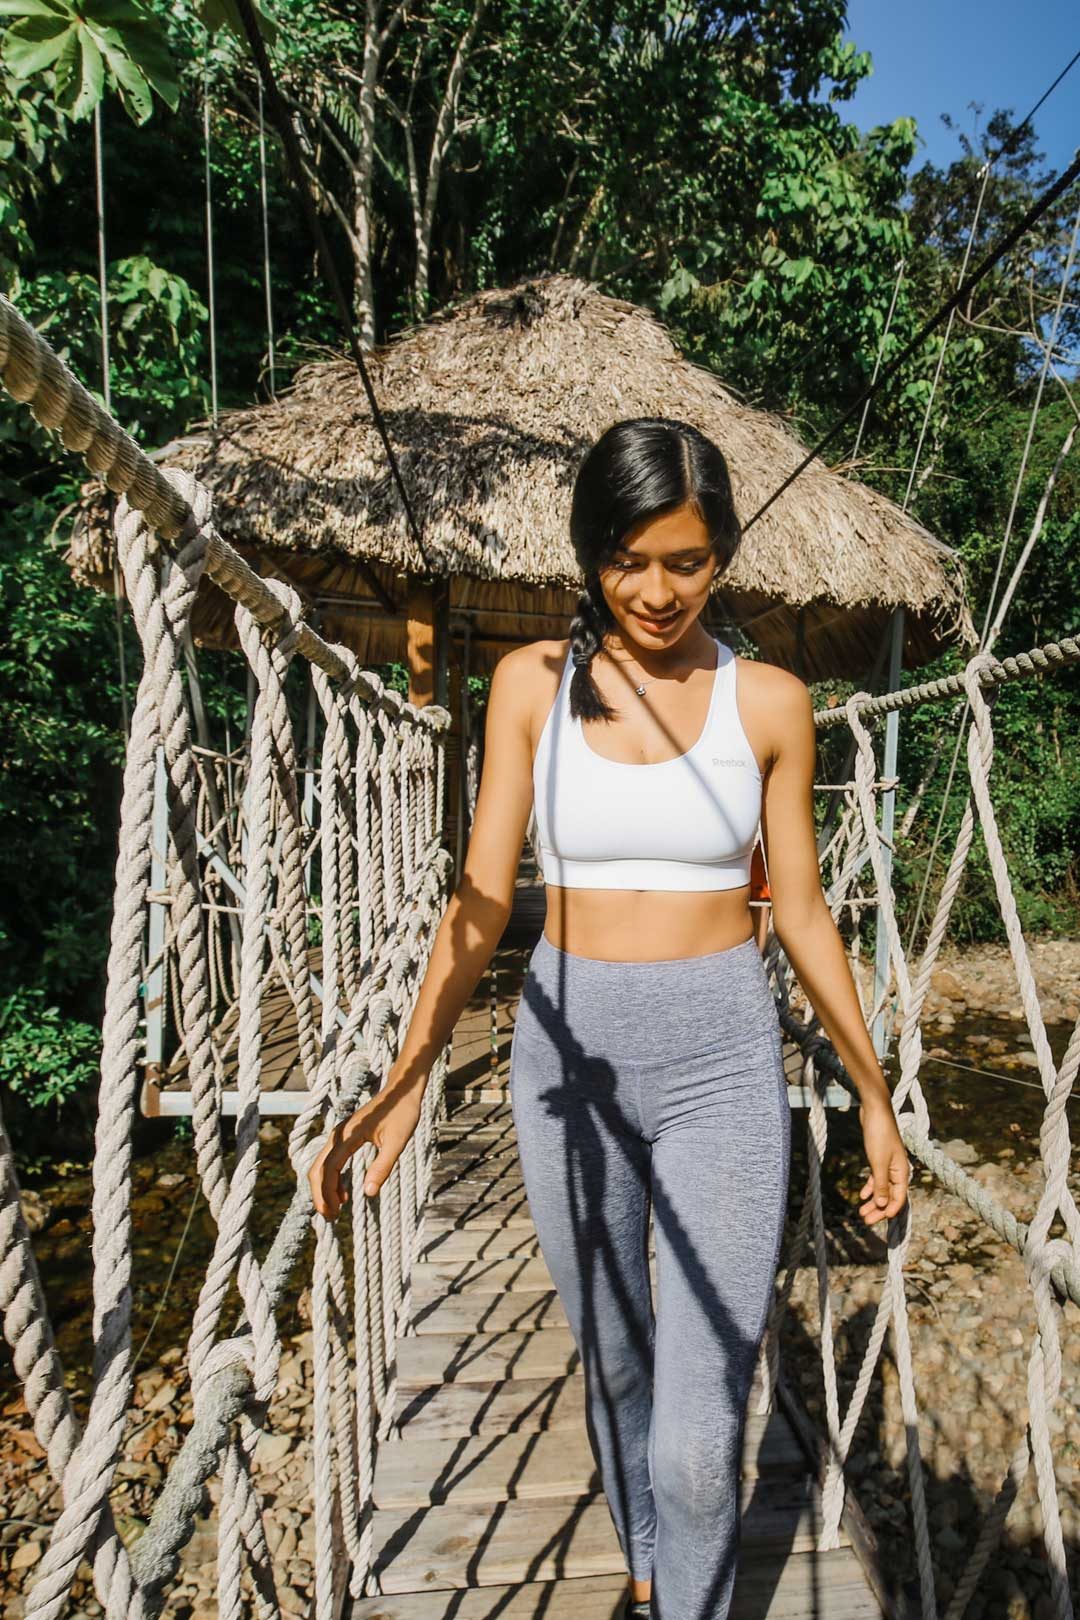 Gest standing on a swinging rope bridge with a thatched structure in the background